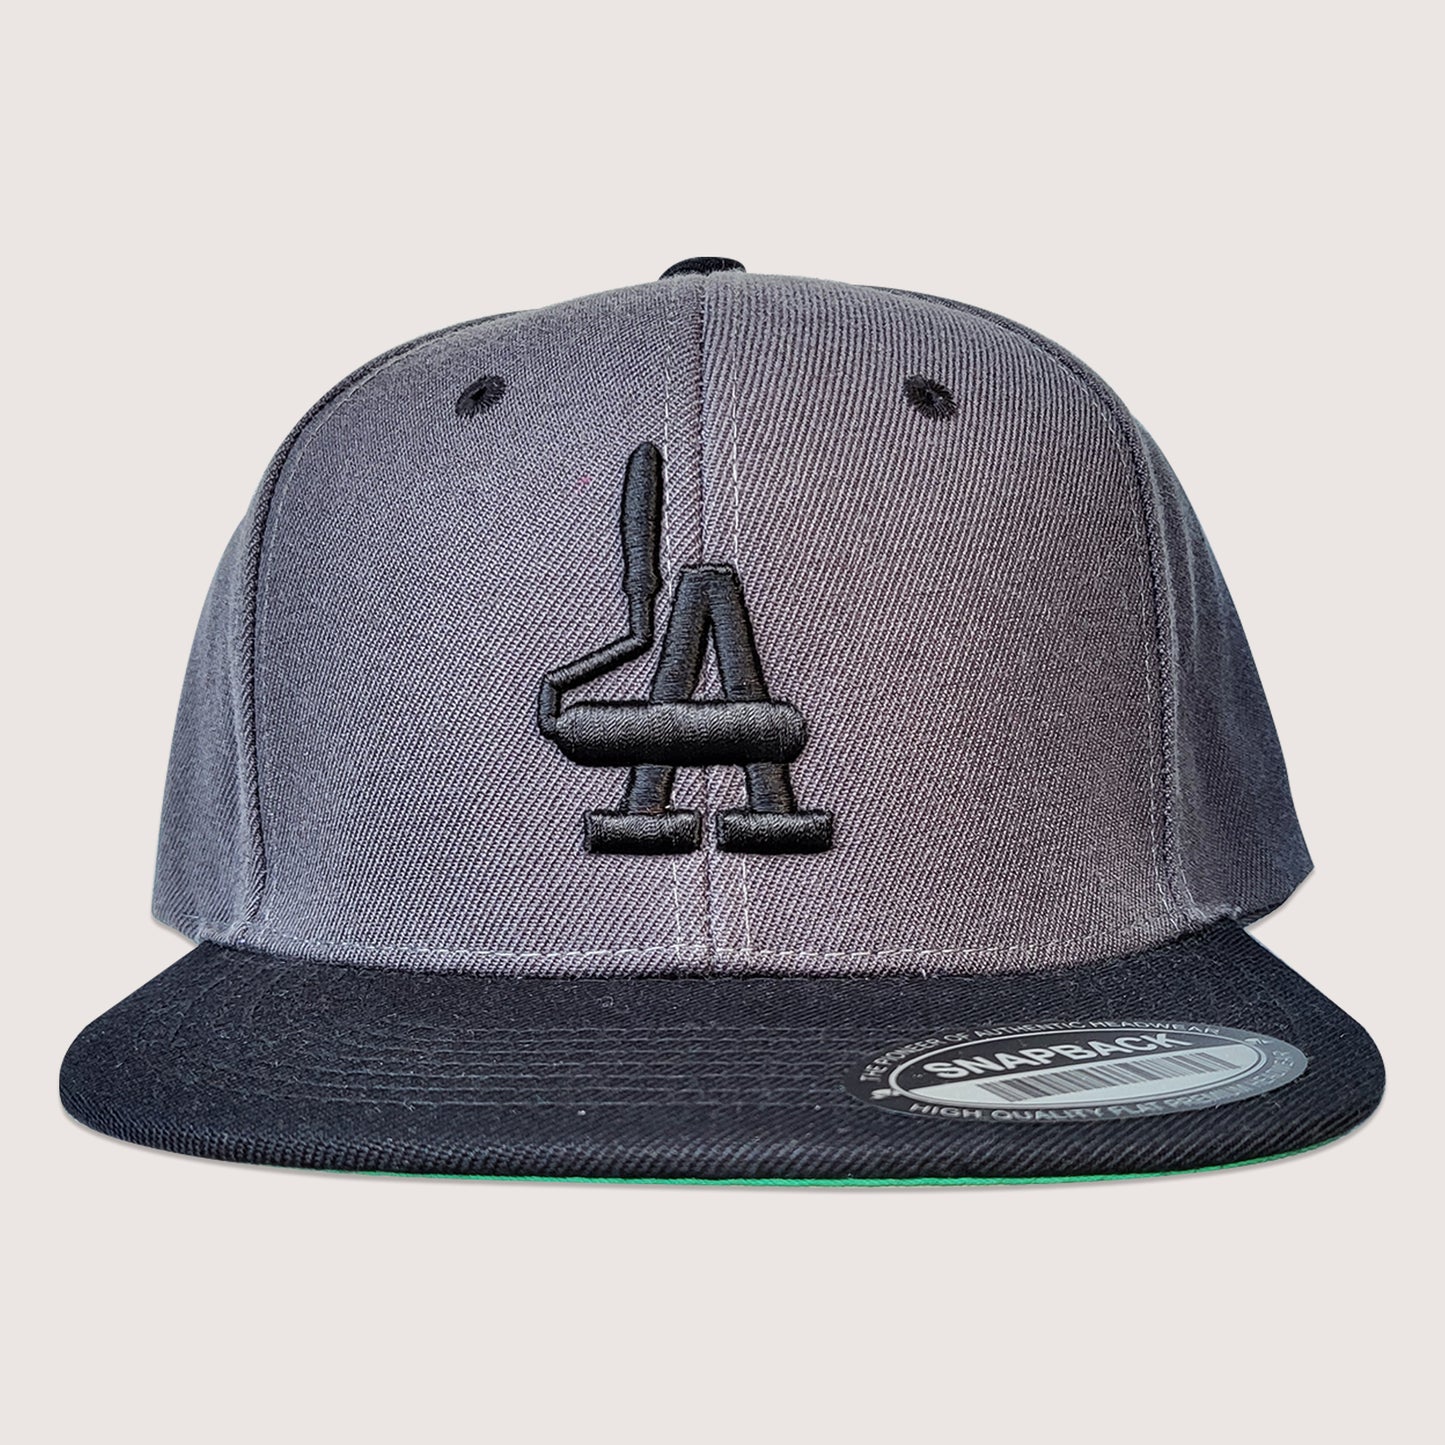 Phatcaps brand baseball cap in grey with black embroidery